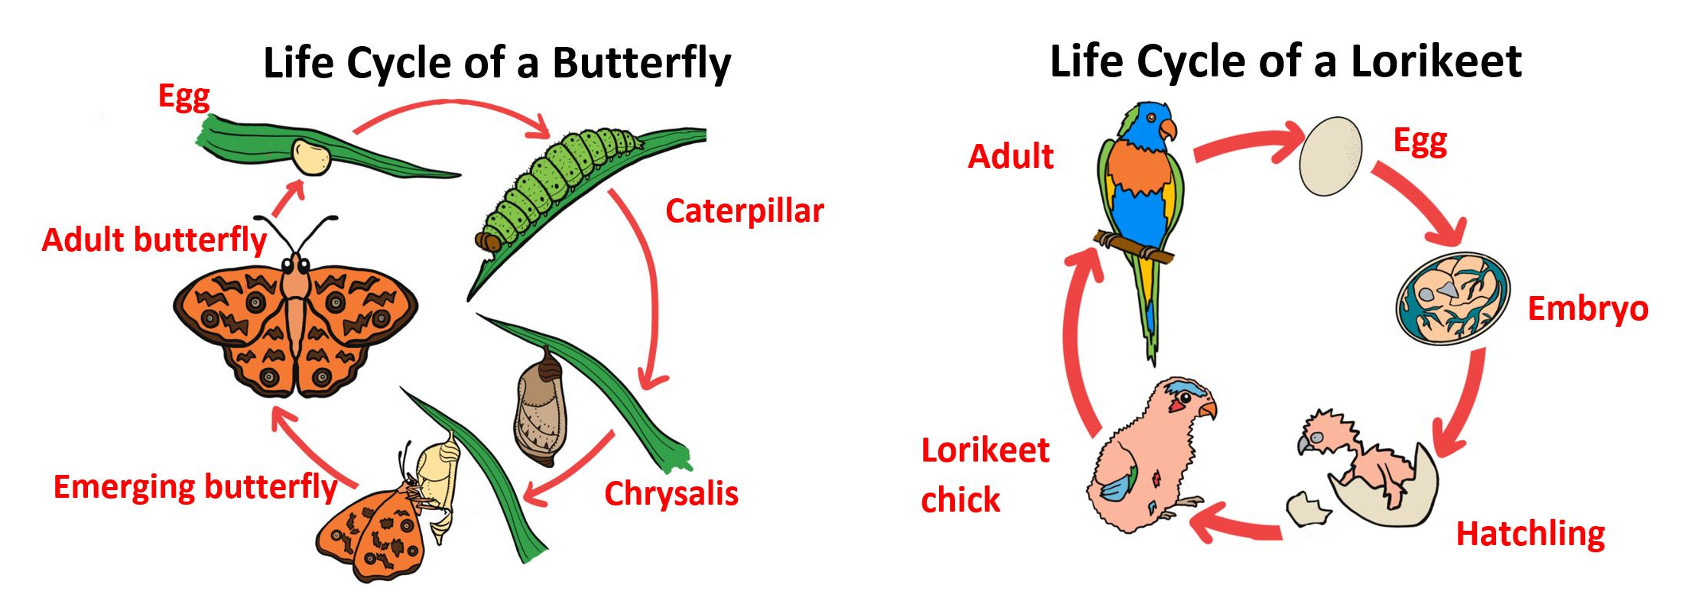 Diagram showing the lifecycle of a Butterfly and Lorikeet